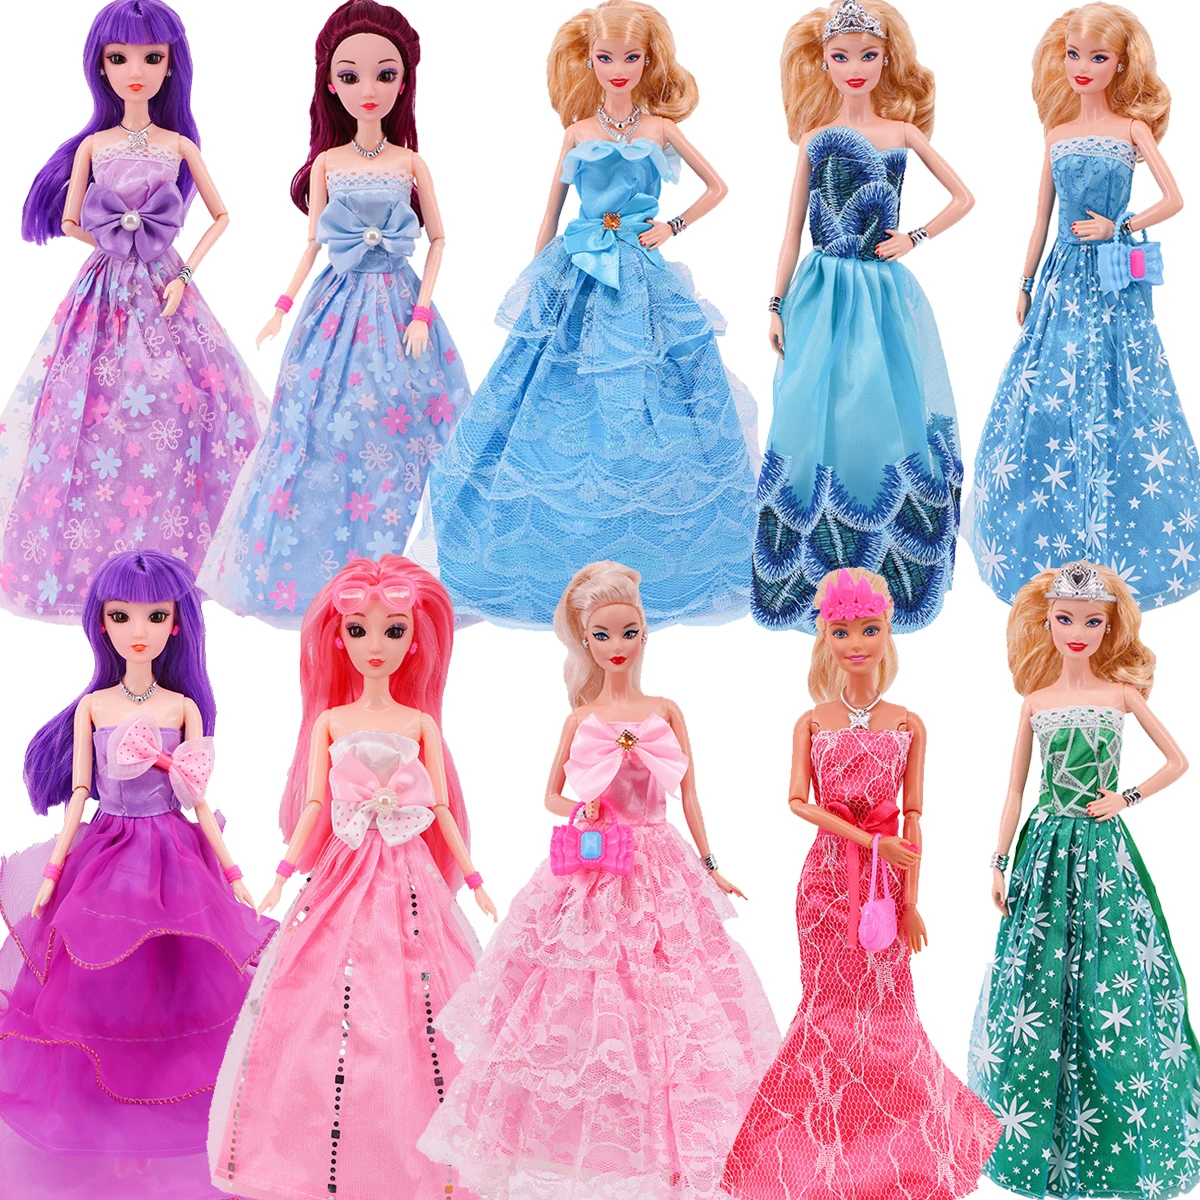 

Barbies 5Pcs=1 Evening Dress+4 Piece Random Accessories For 11.5inch Barbies Doll Cocktail Daily Casual Clothing Accessories